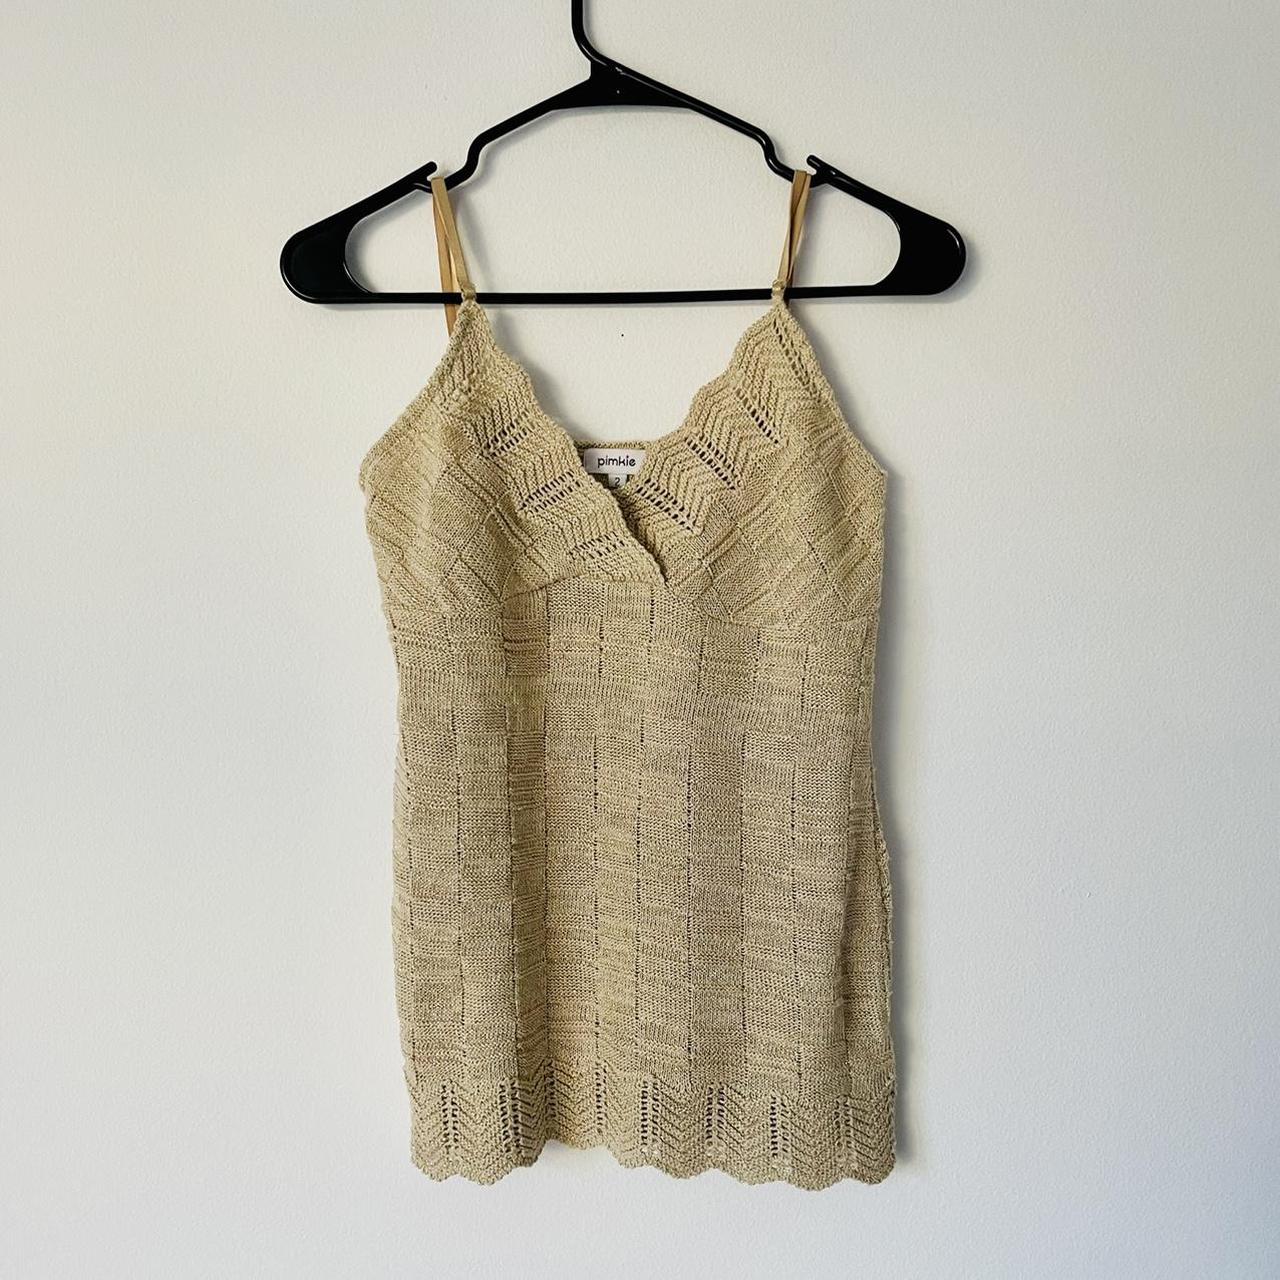 Pimkie Women's Gold and Tan Vest